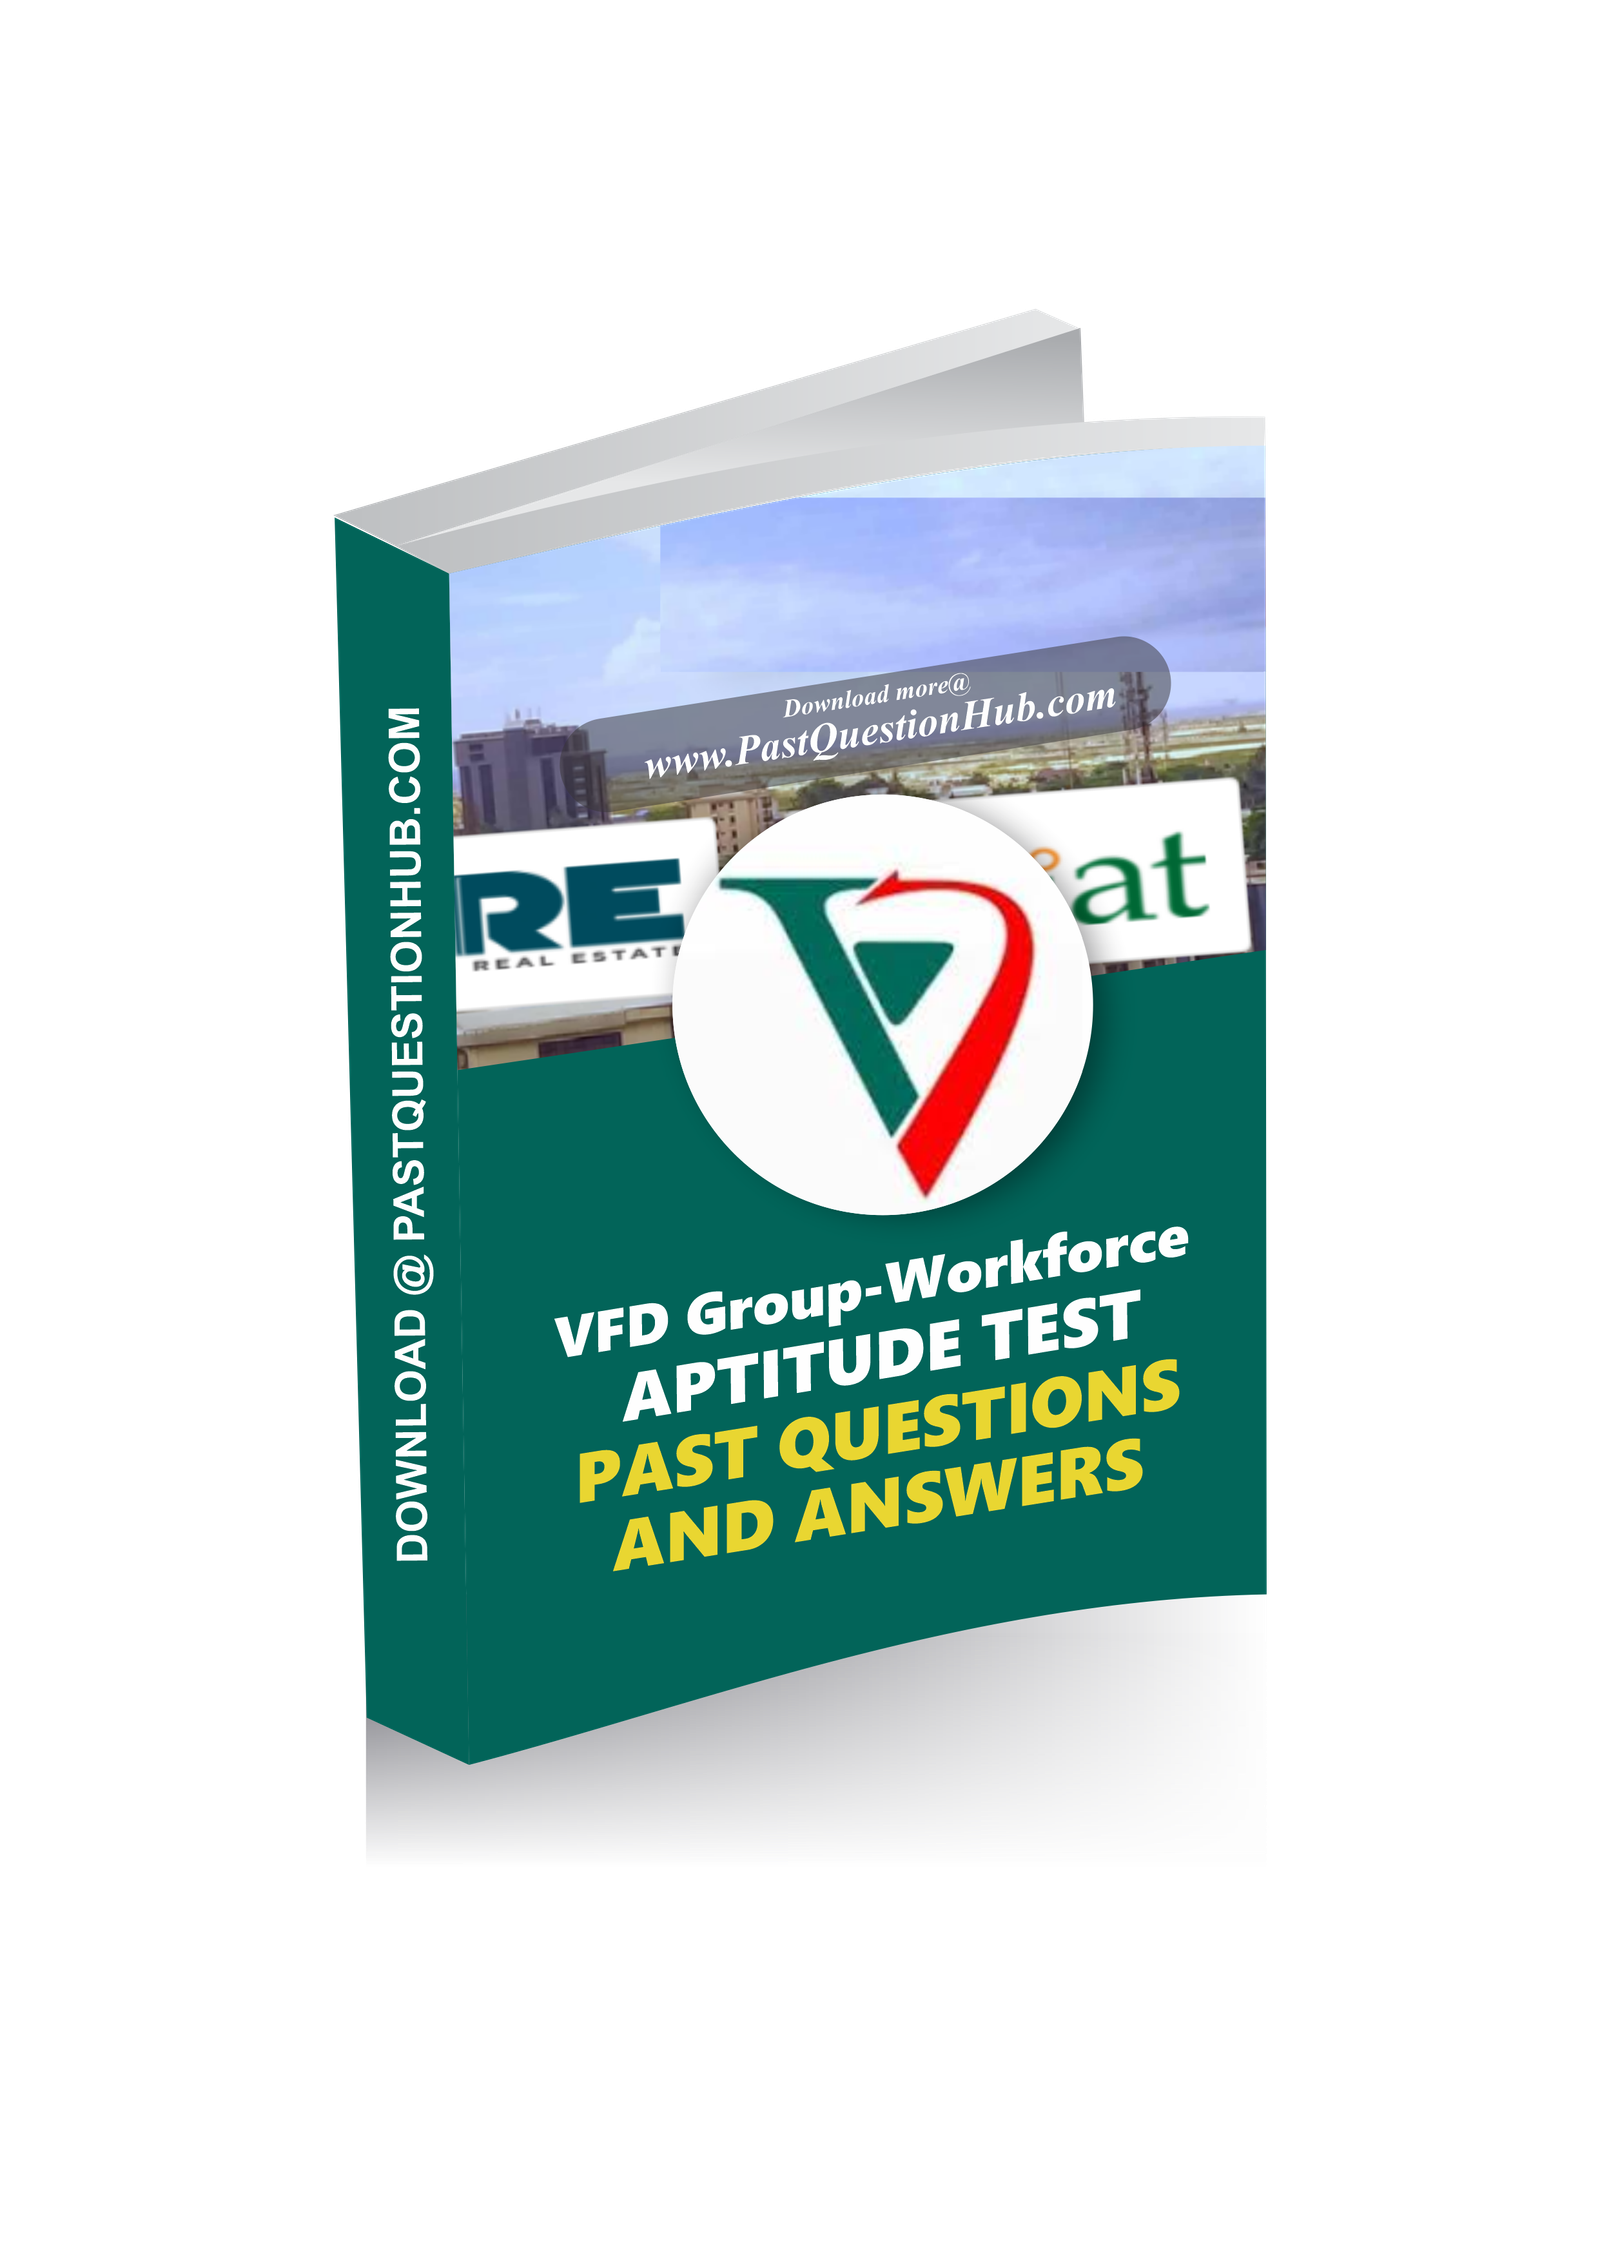 vfd-group-workforce-past-questions-and-answers-pdf-up-to-date